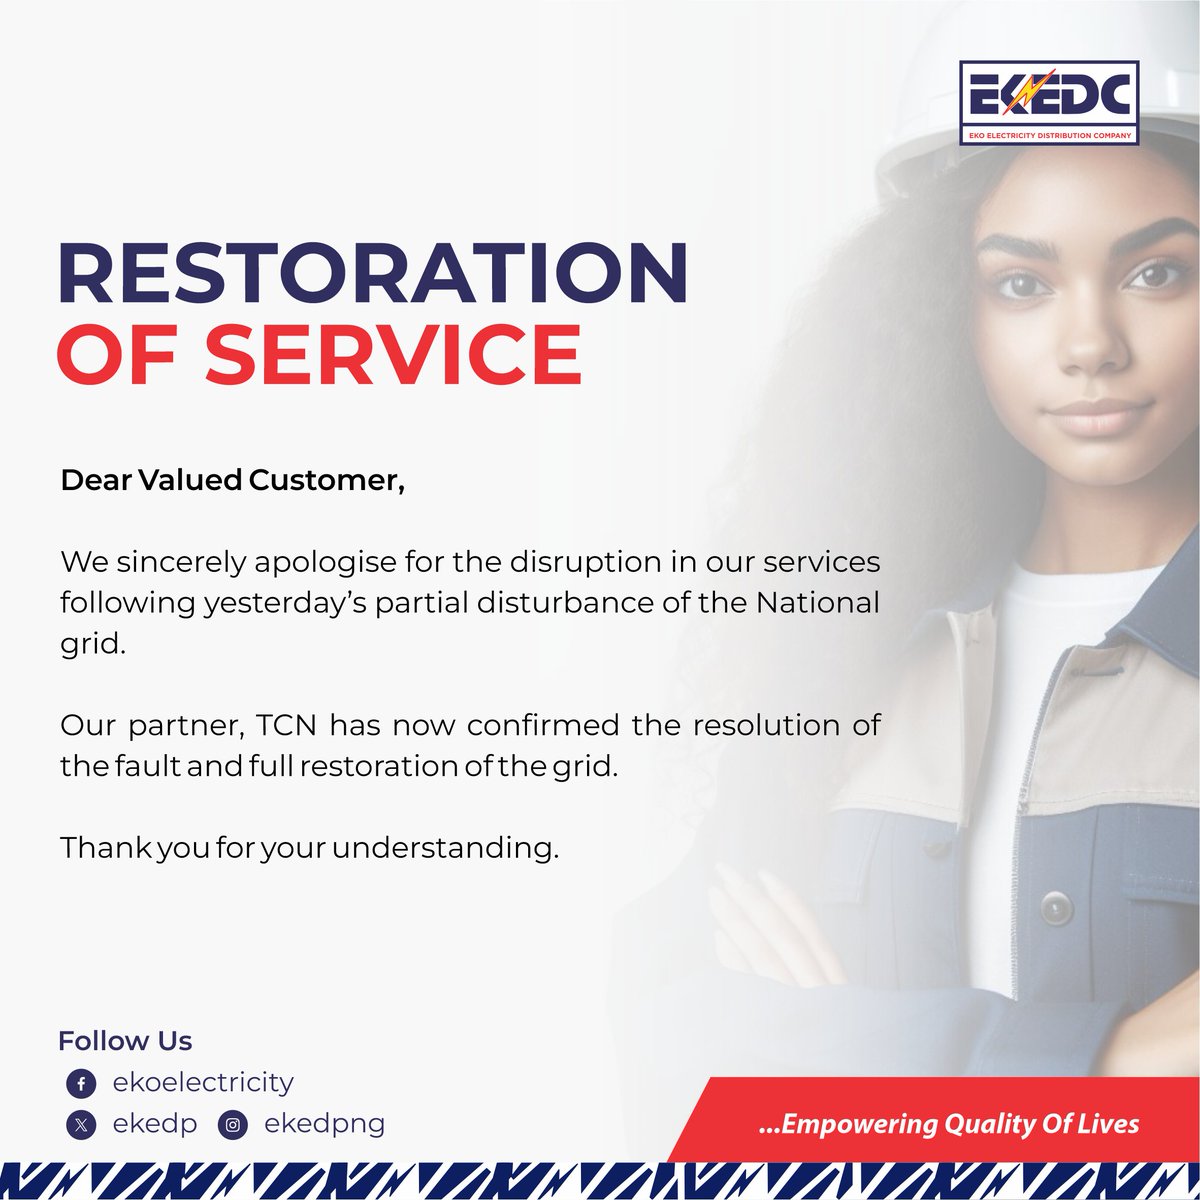 RESTORATION OF SERVICE Dear Valued Customer, We sincerely apologise for the disruption in our services following yesterday’s partial disturbance of the National grid. Our partner, TCN has now confirmed the resolution of the fault and full restoration of the grid. Thank you…